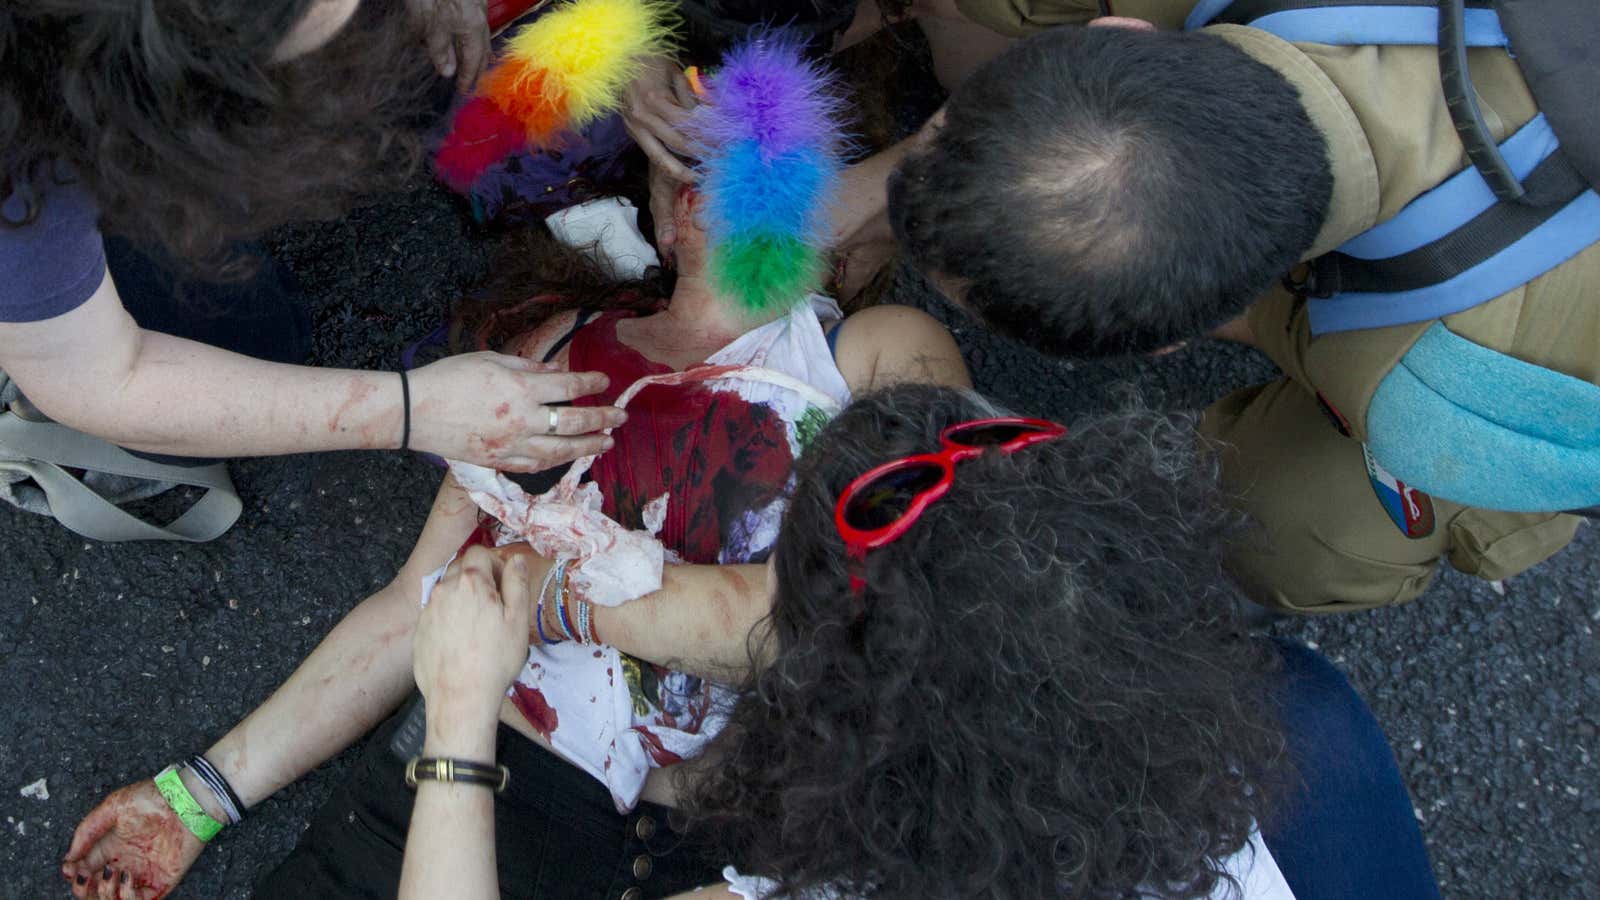 Paramedics help a wounded woman after an ultra-Orthodox Jew attacked people with a knife during a Gay Pride parade.